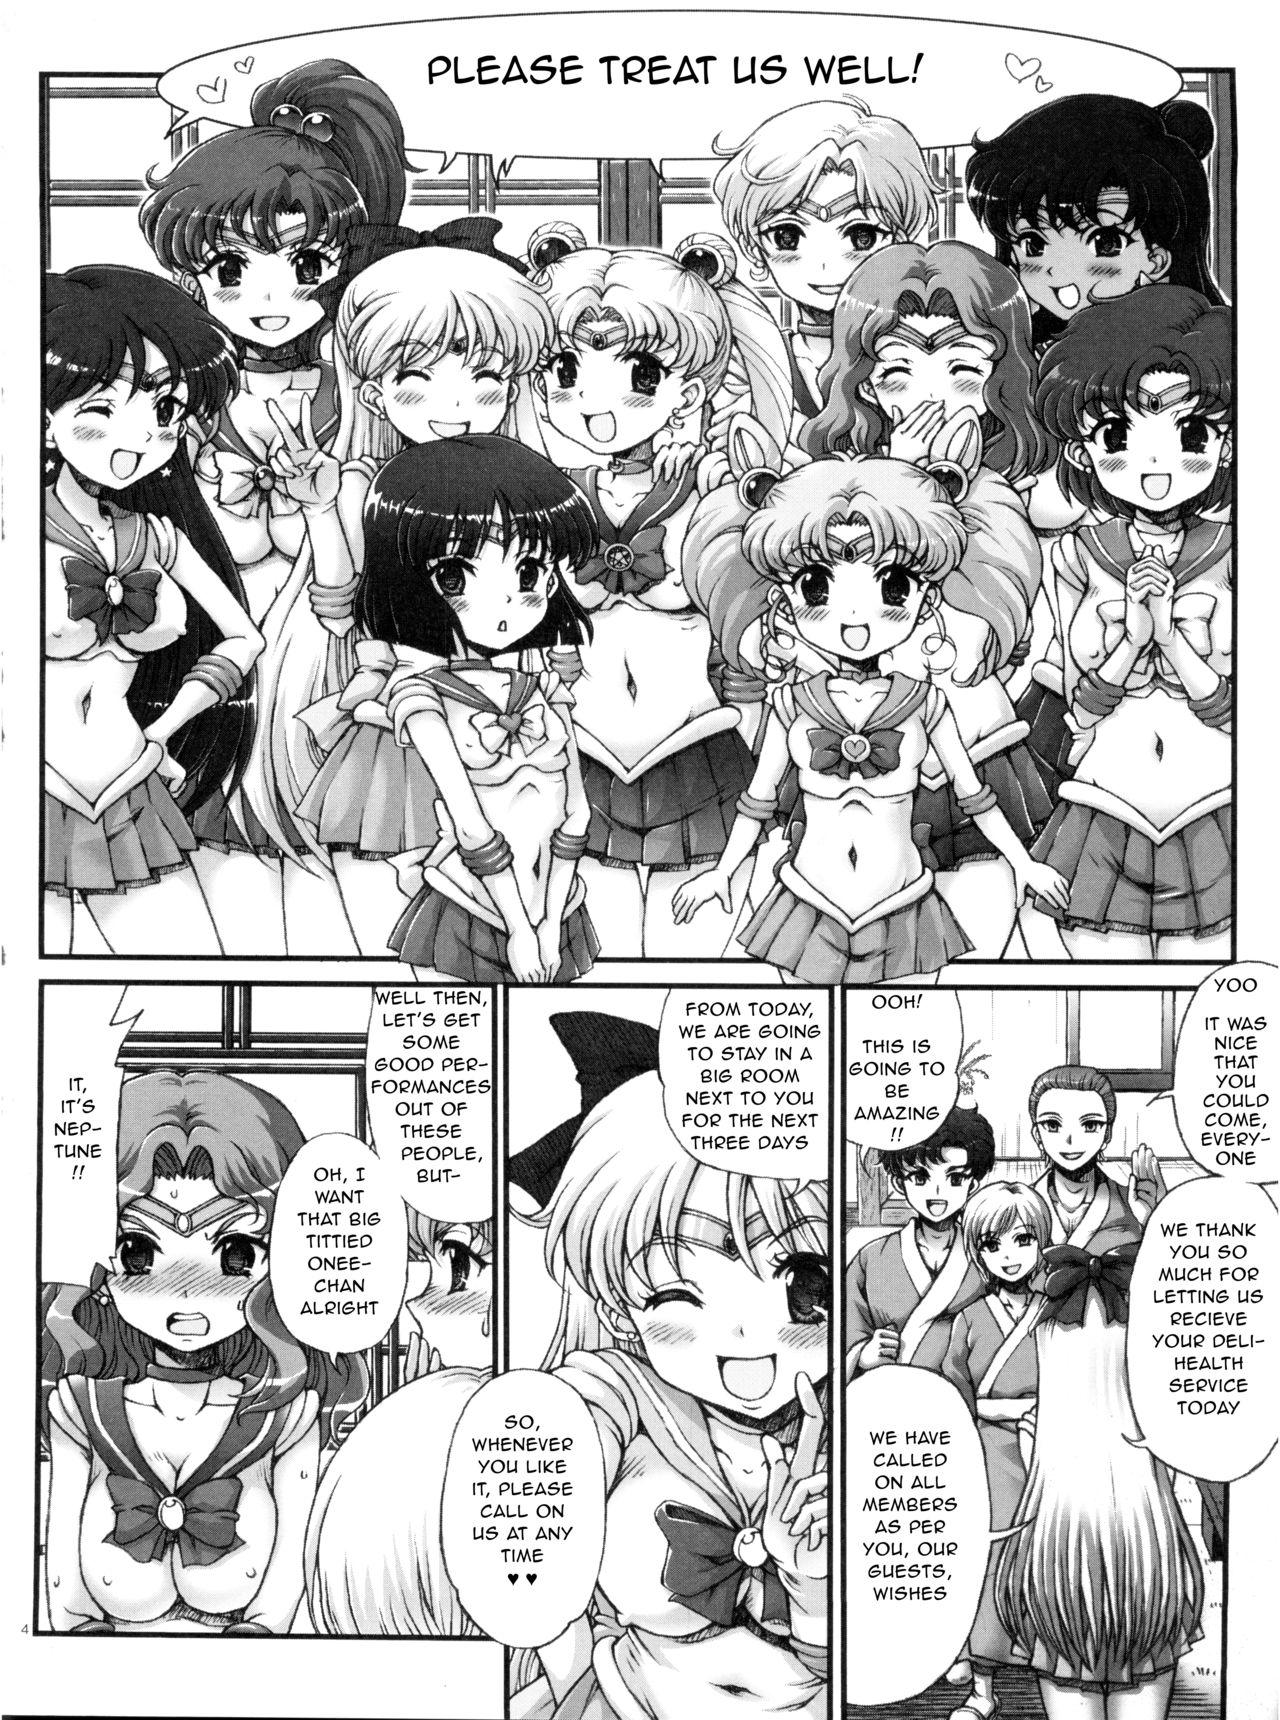 Hot Naked Women Sailor Delivery Health All Stars - Sailor moon Licking - Page 3